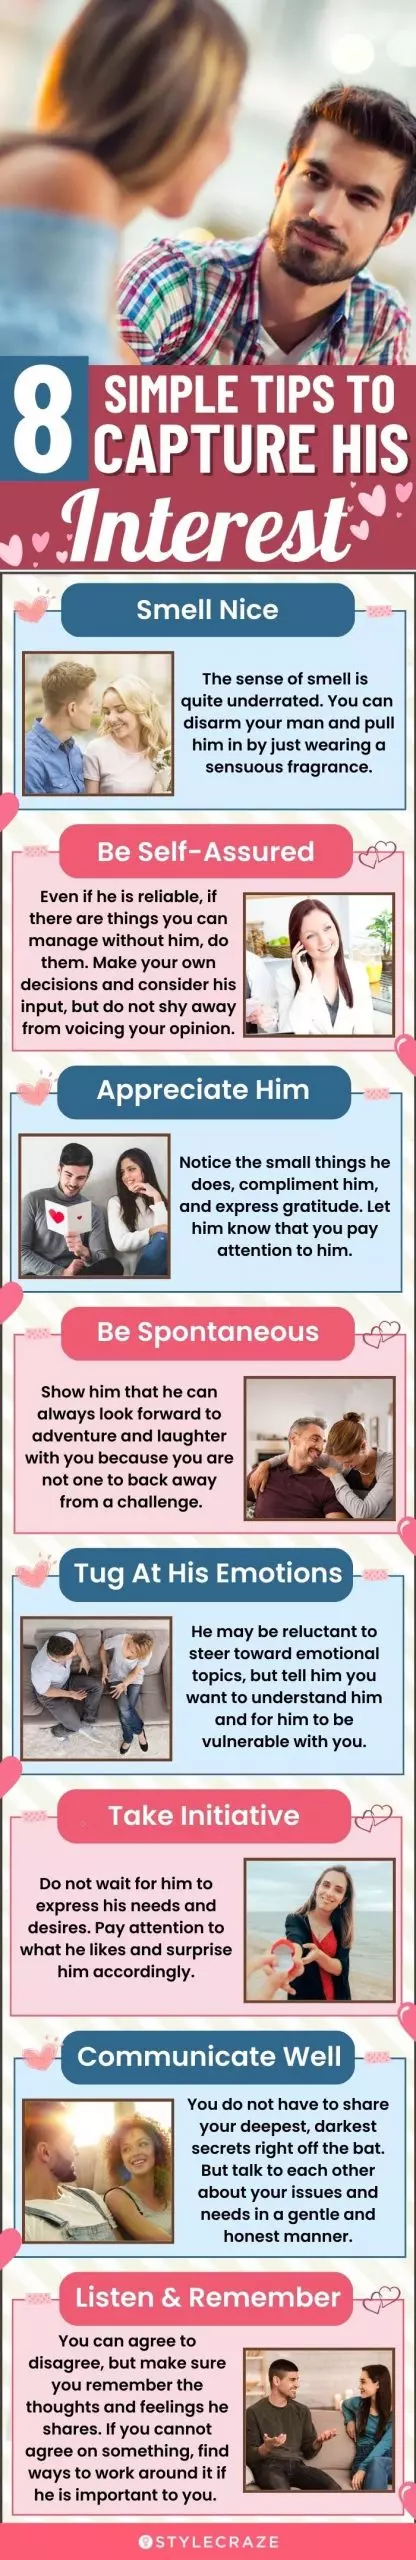 8 simple tips to capture his interest (infographic)